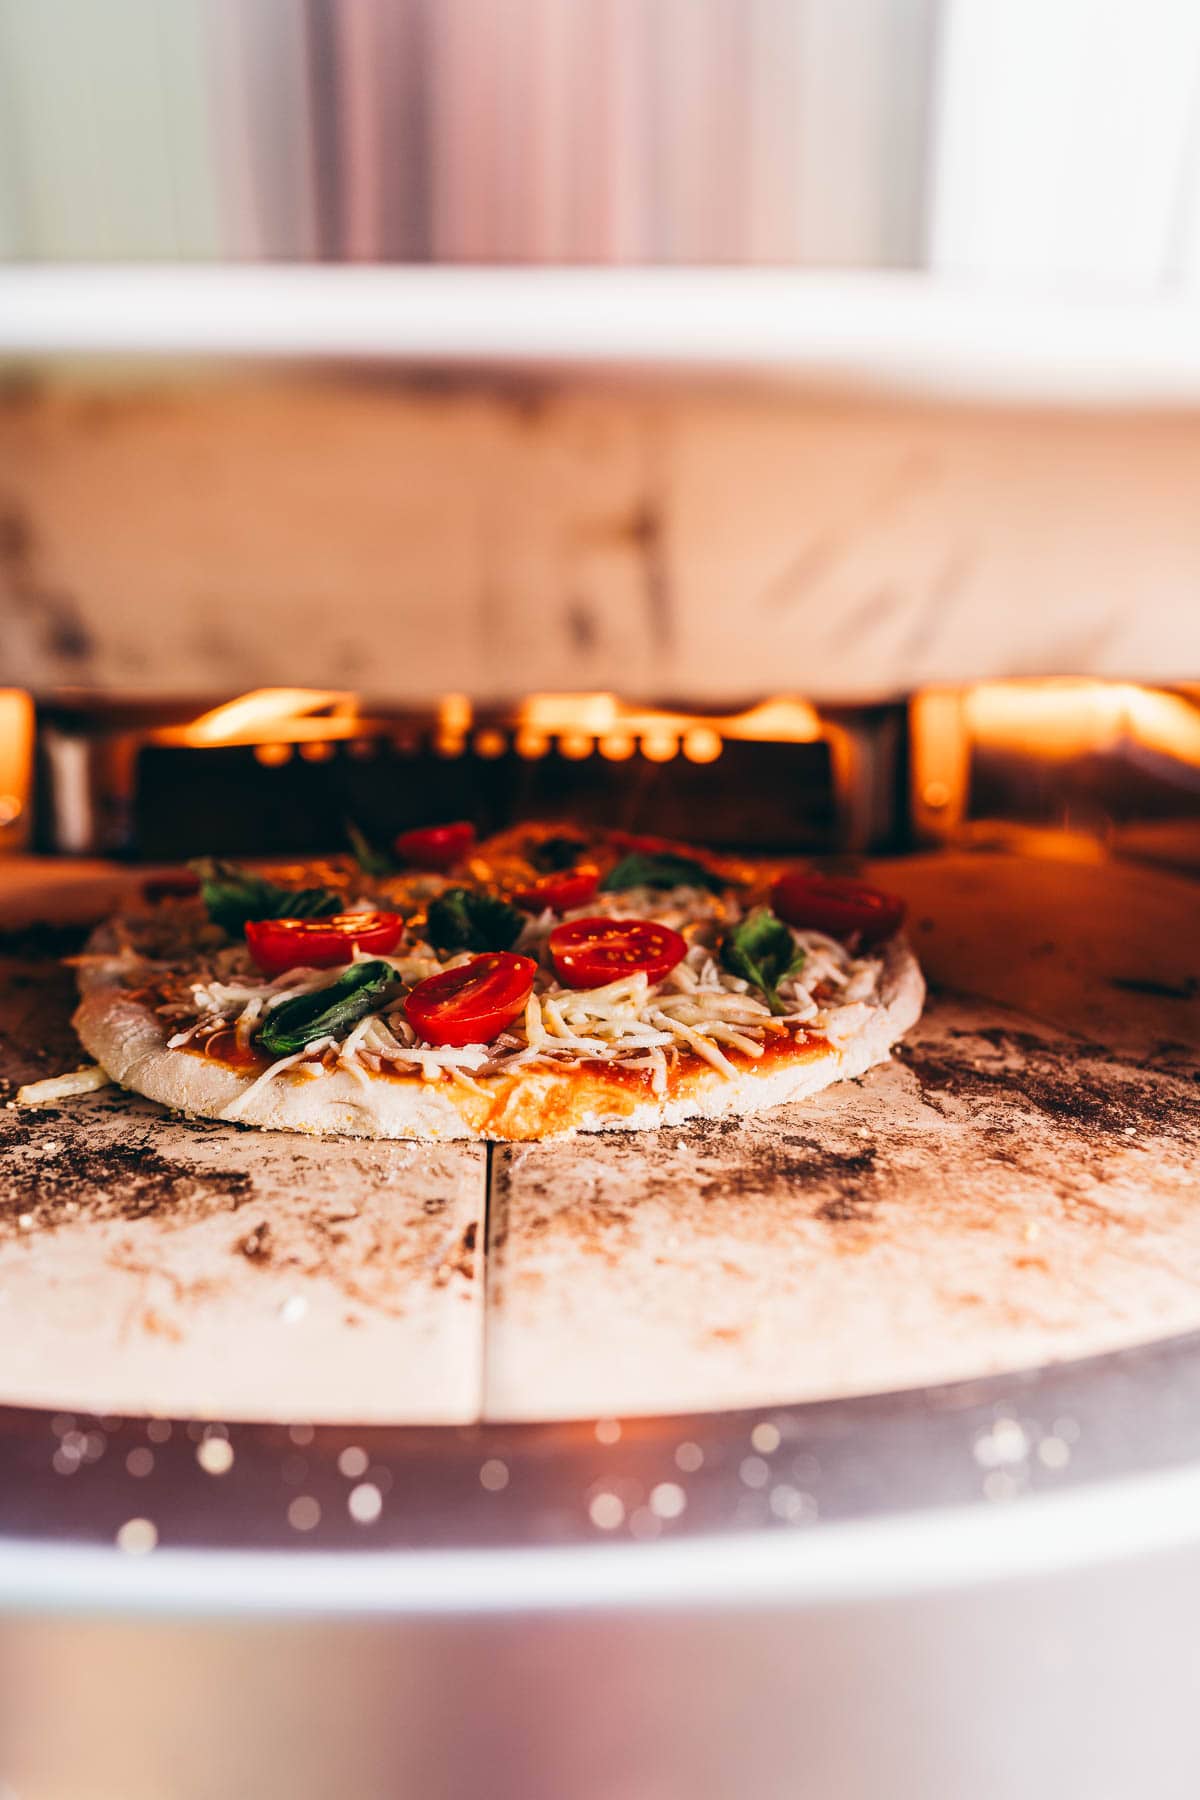 A pizza being cooked in a Solo Stove pizza oven.